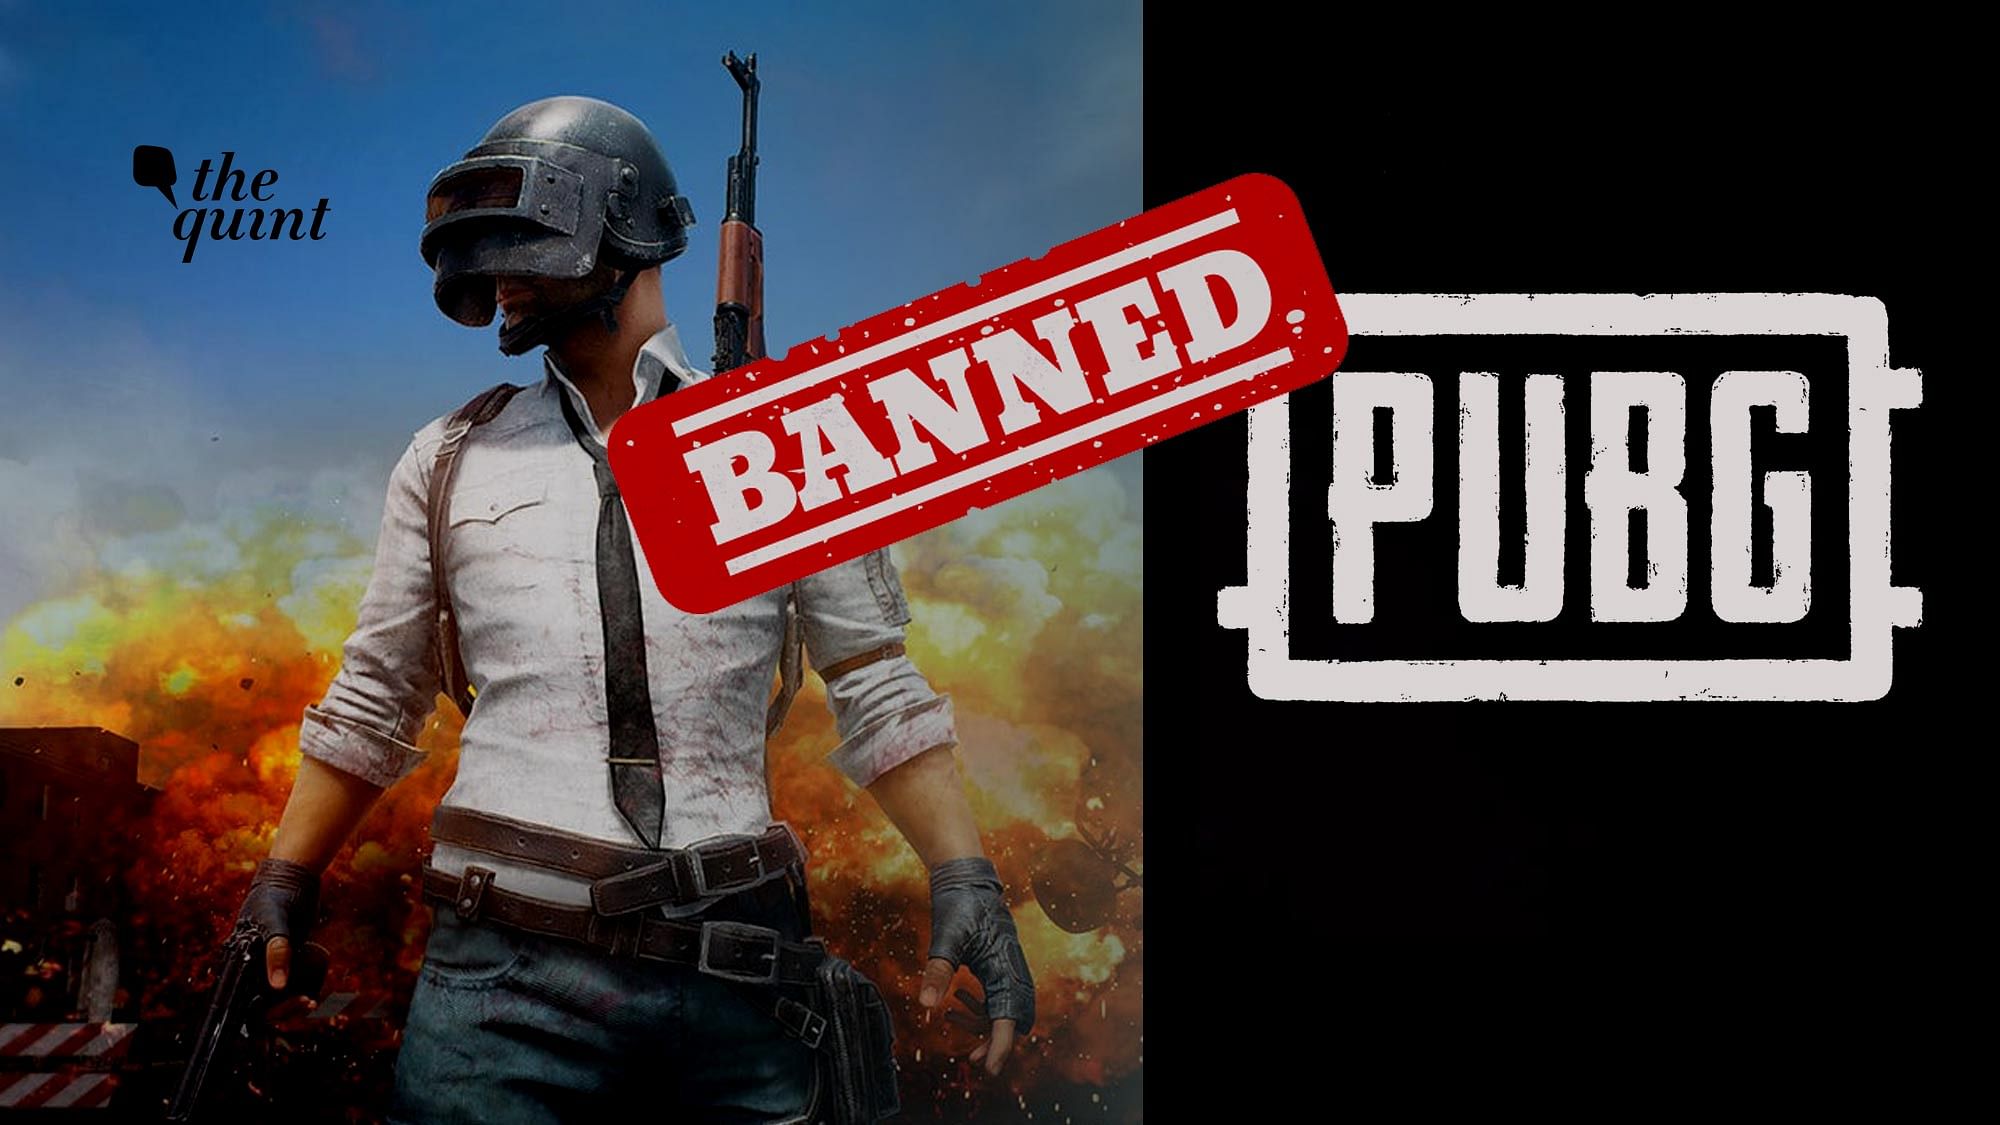 PUBG Mobile is an online multiplayer battle royale game, that was recently banned in India.